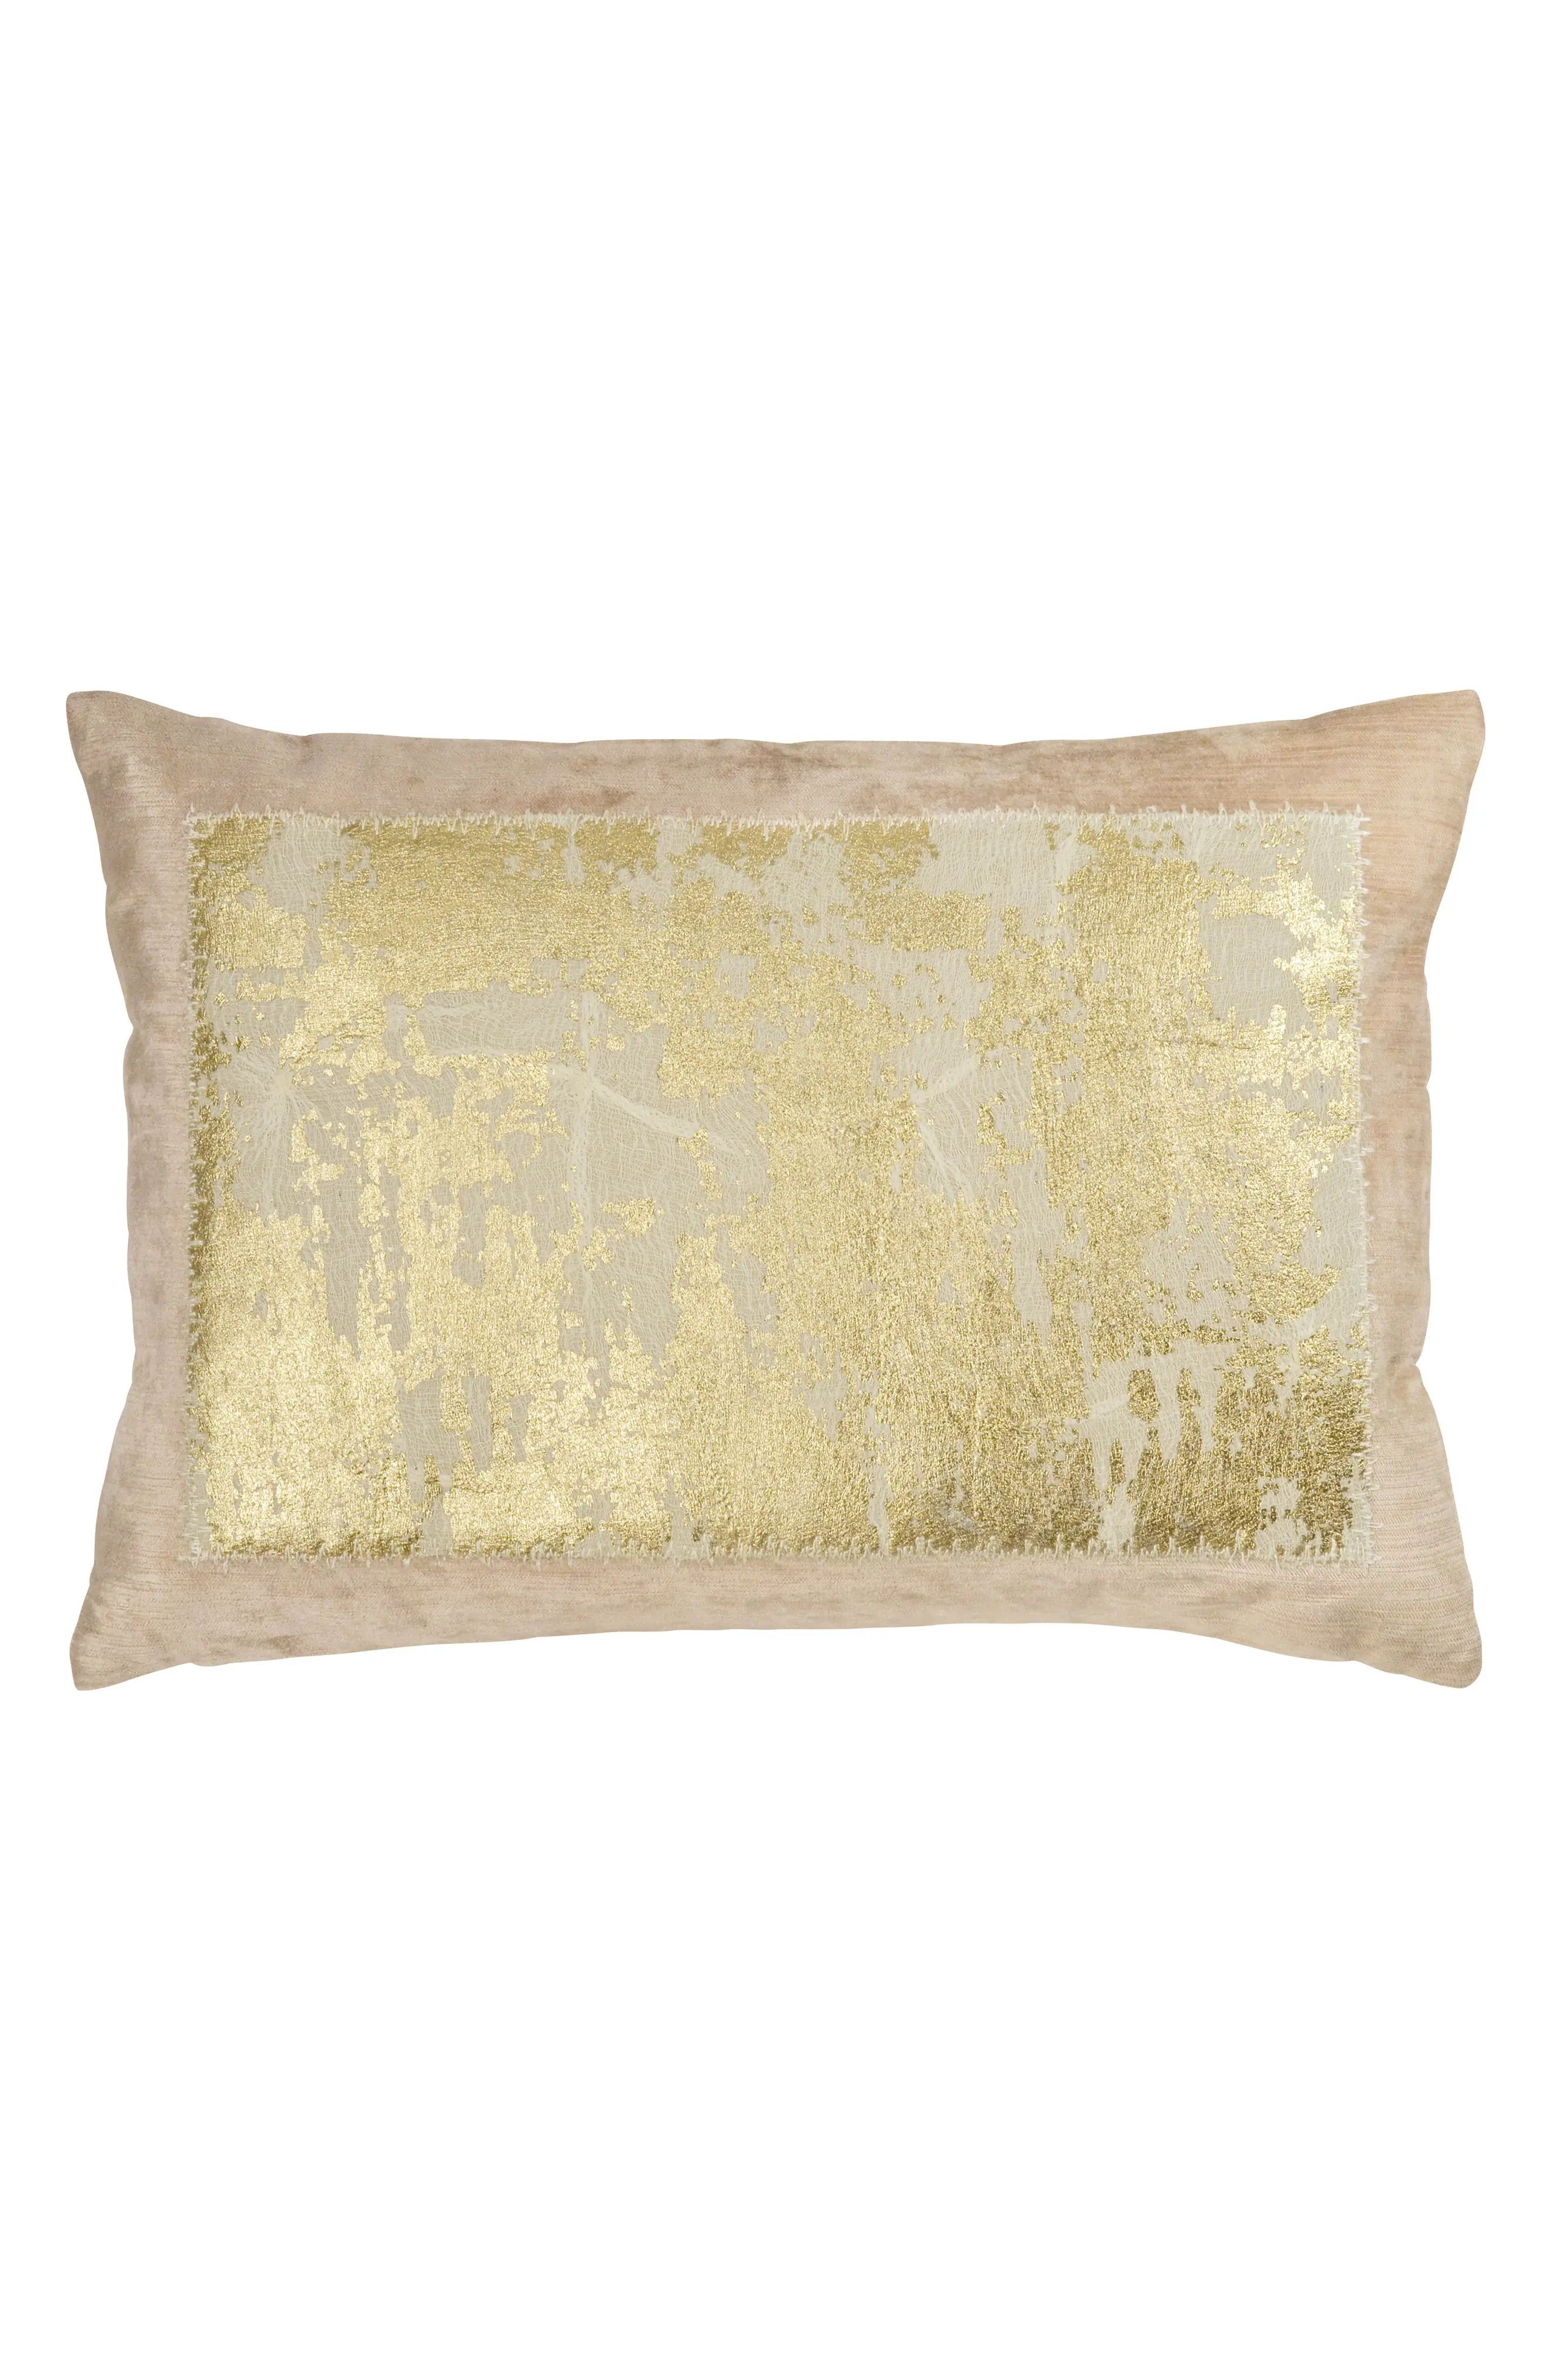 Distressed Metallic Accent Pillow | Nordstrom